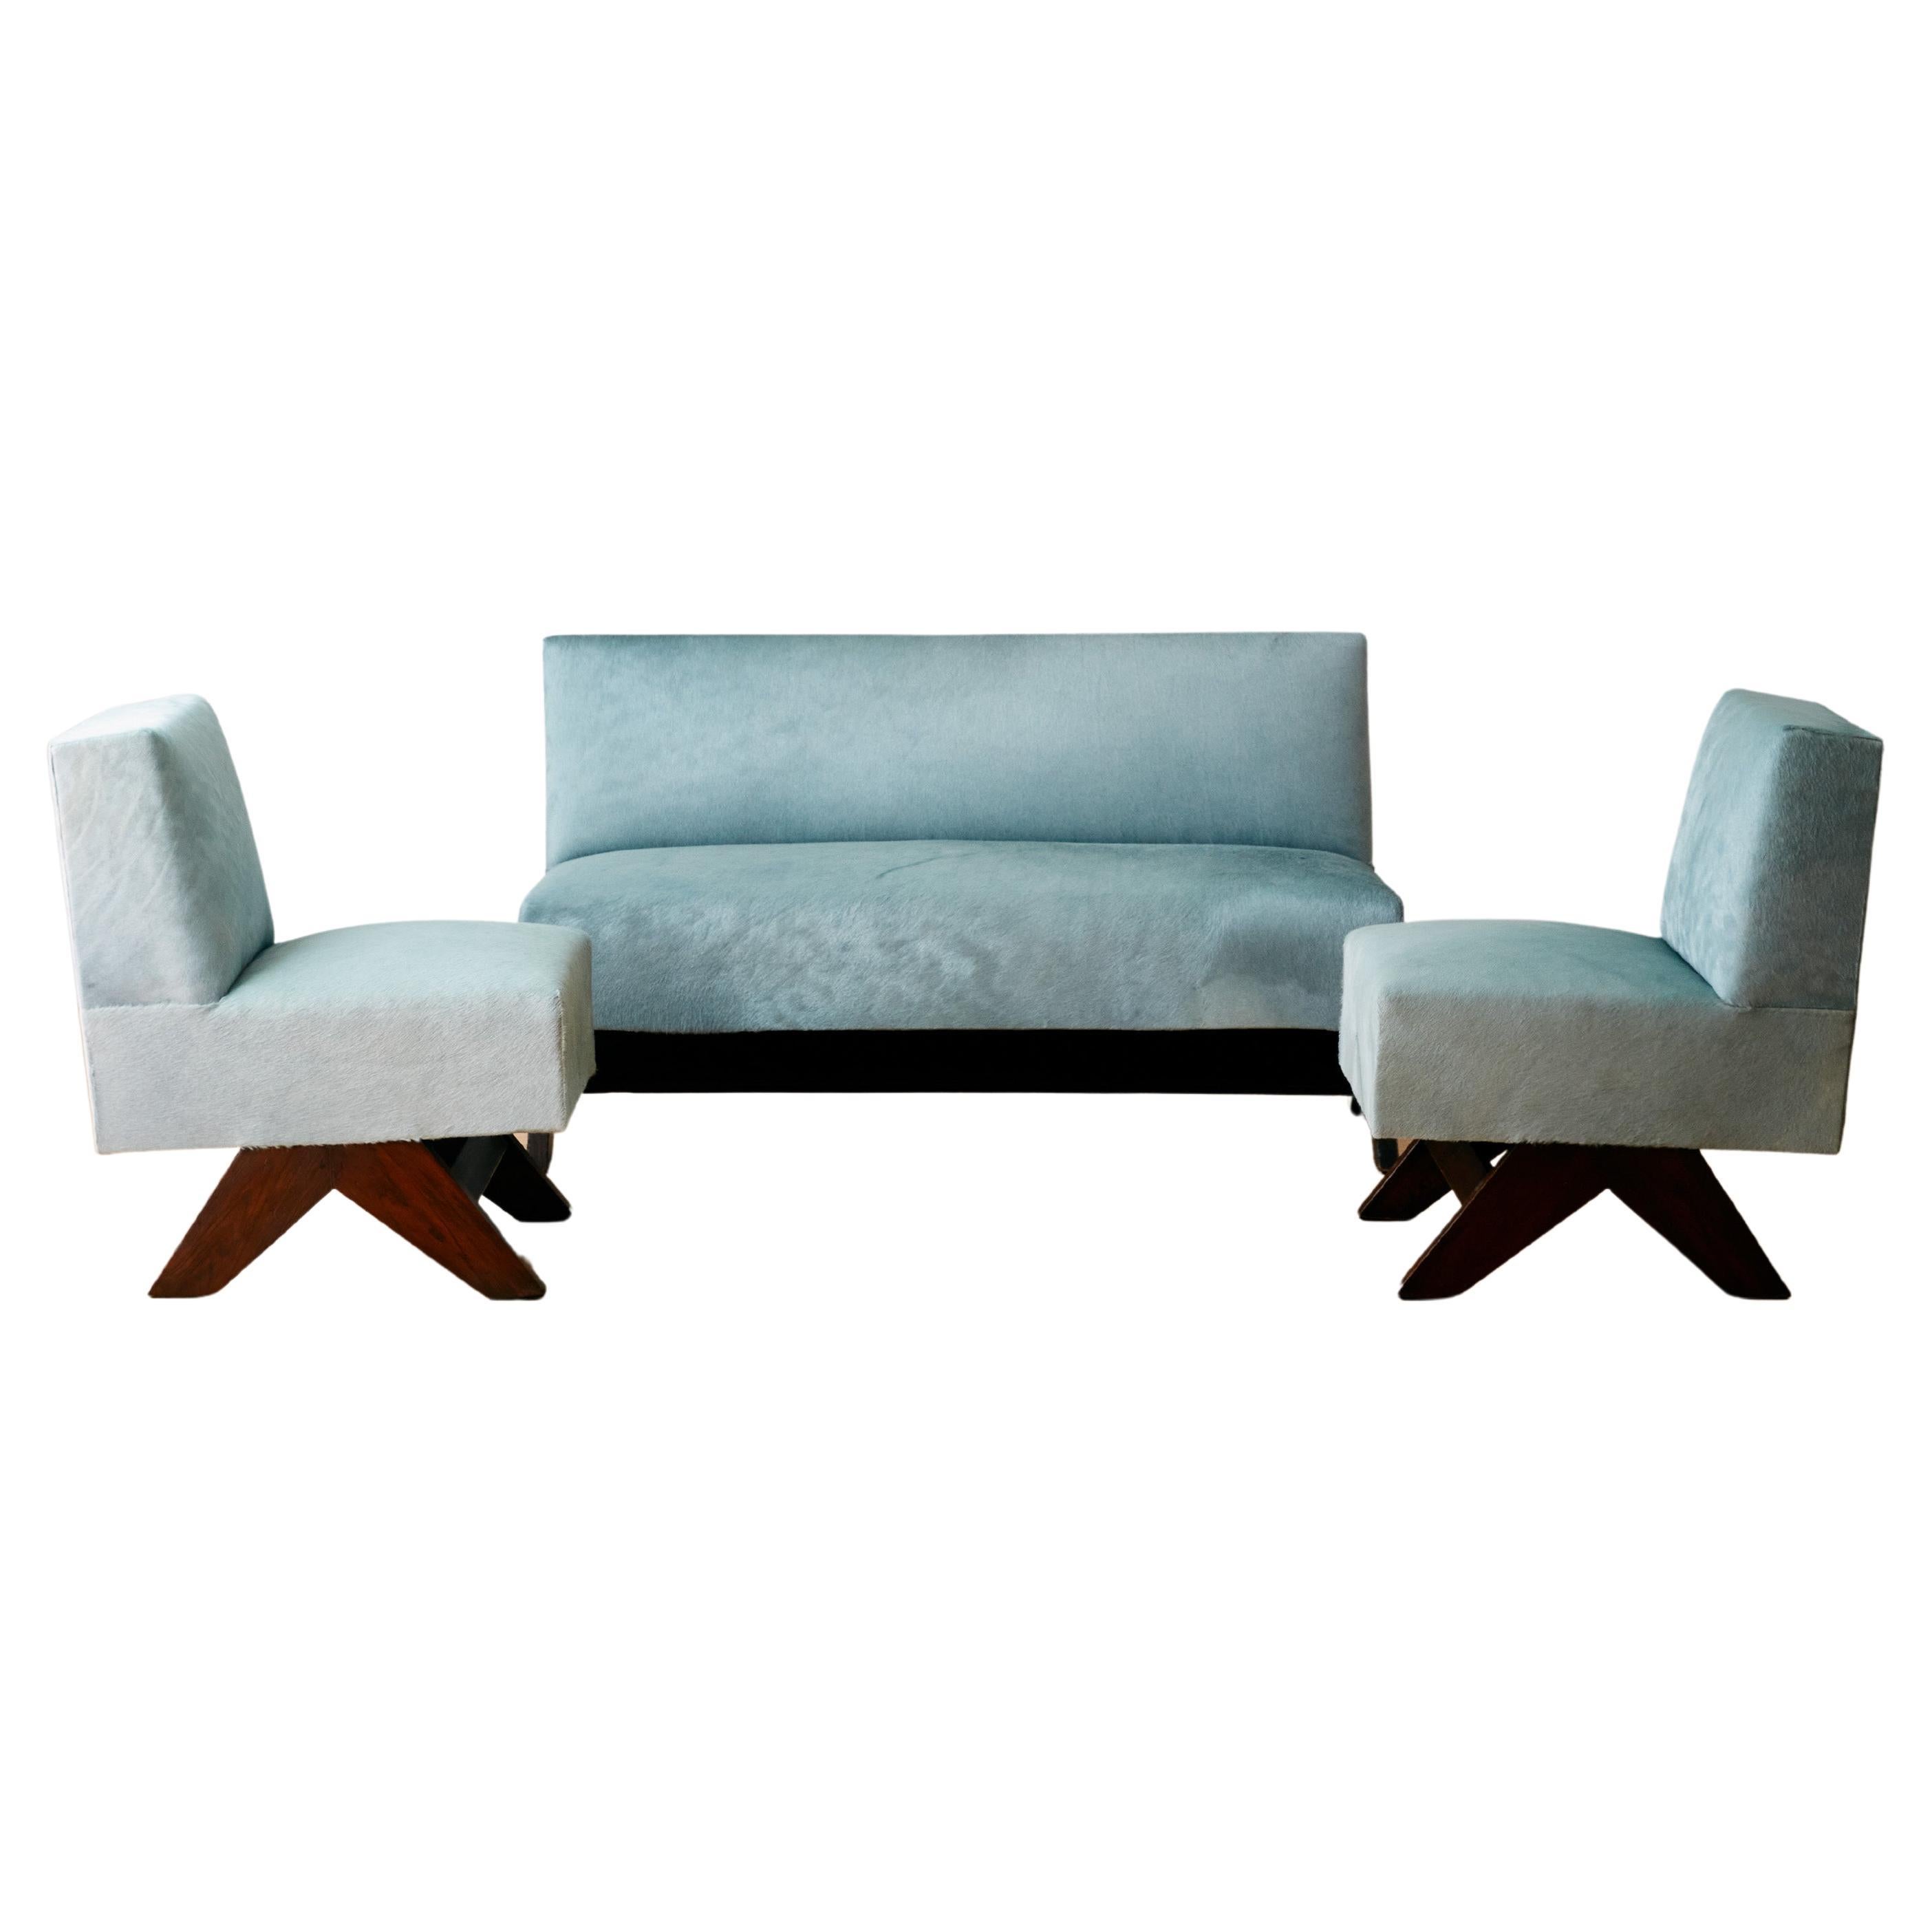 Rare Settee and Pair of Low Lounge Chairs by Pierre Jeanneret